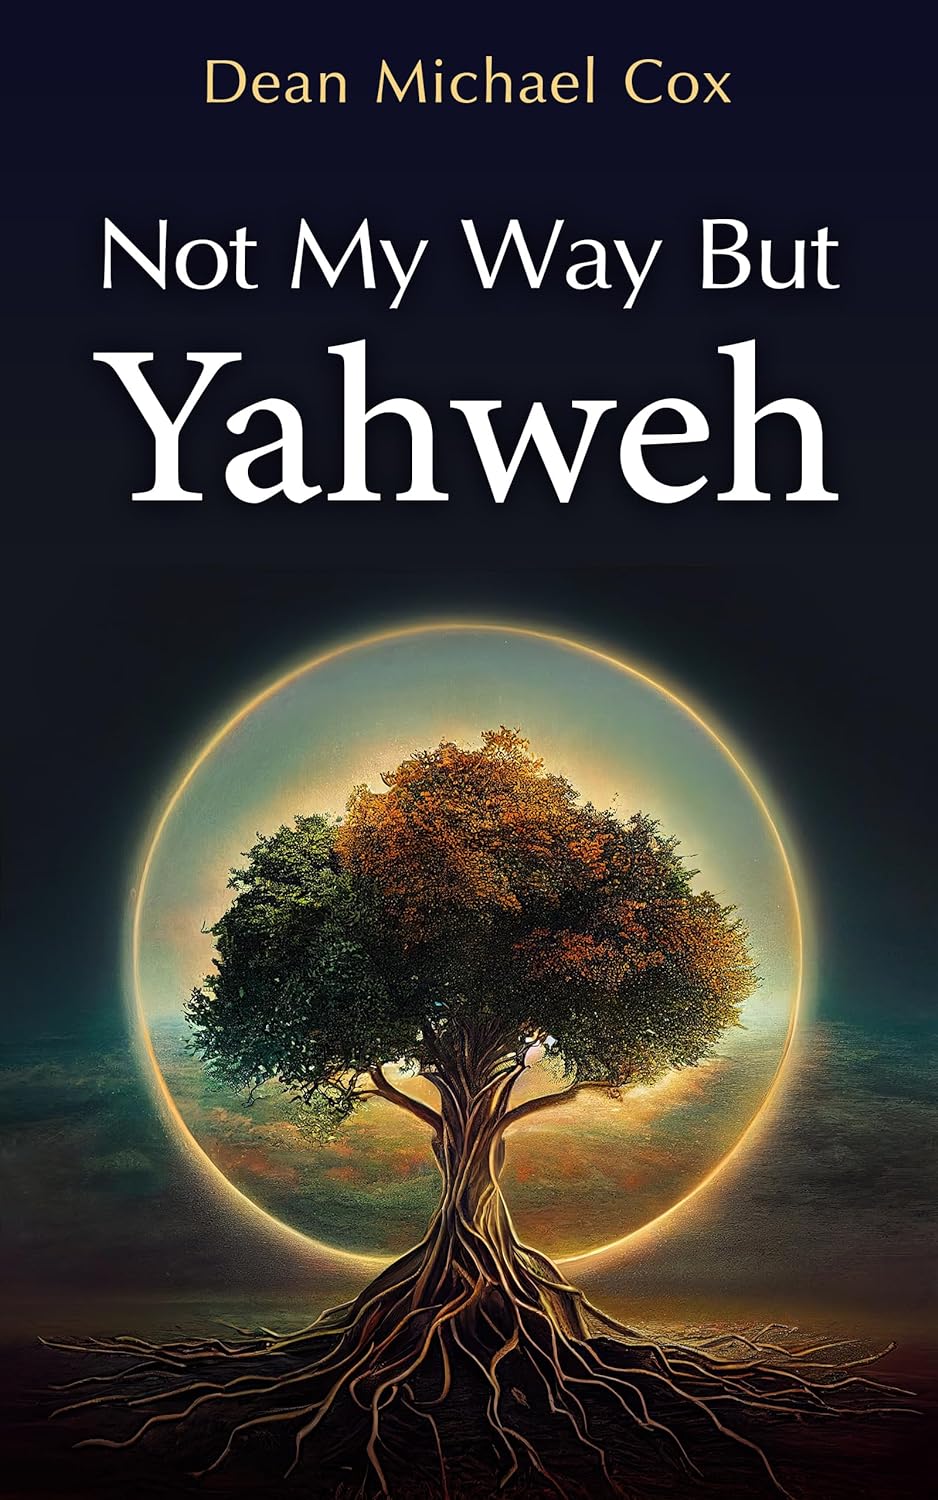 New book "Not My Way But Yahweh" by Dean Michael Cox is released, an empowering collection of daily devotions to heal and find hope through God and Jesus Christ